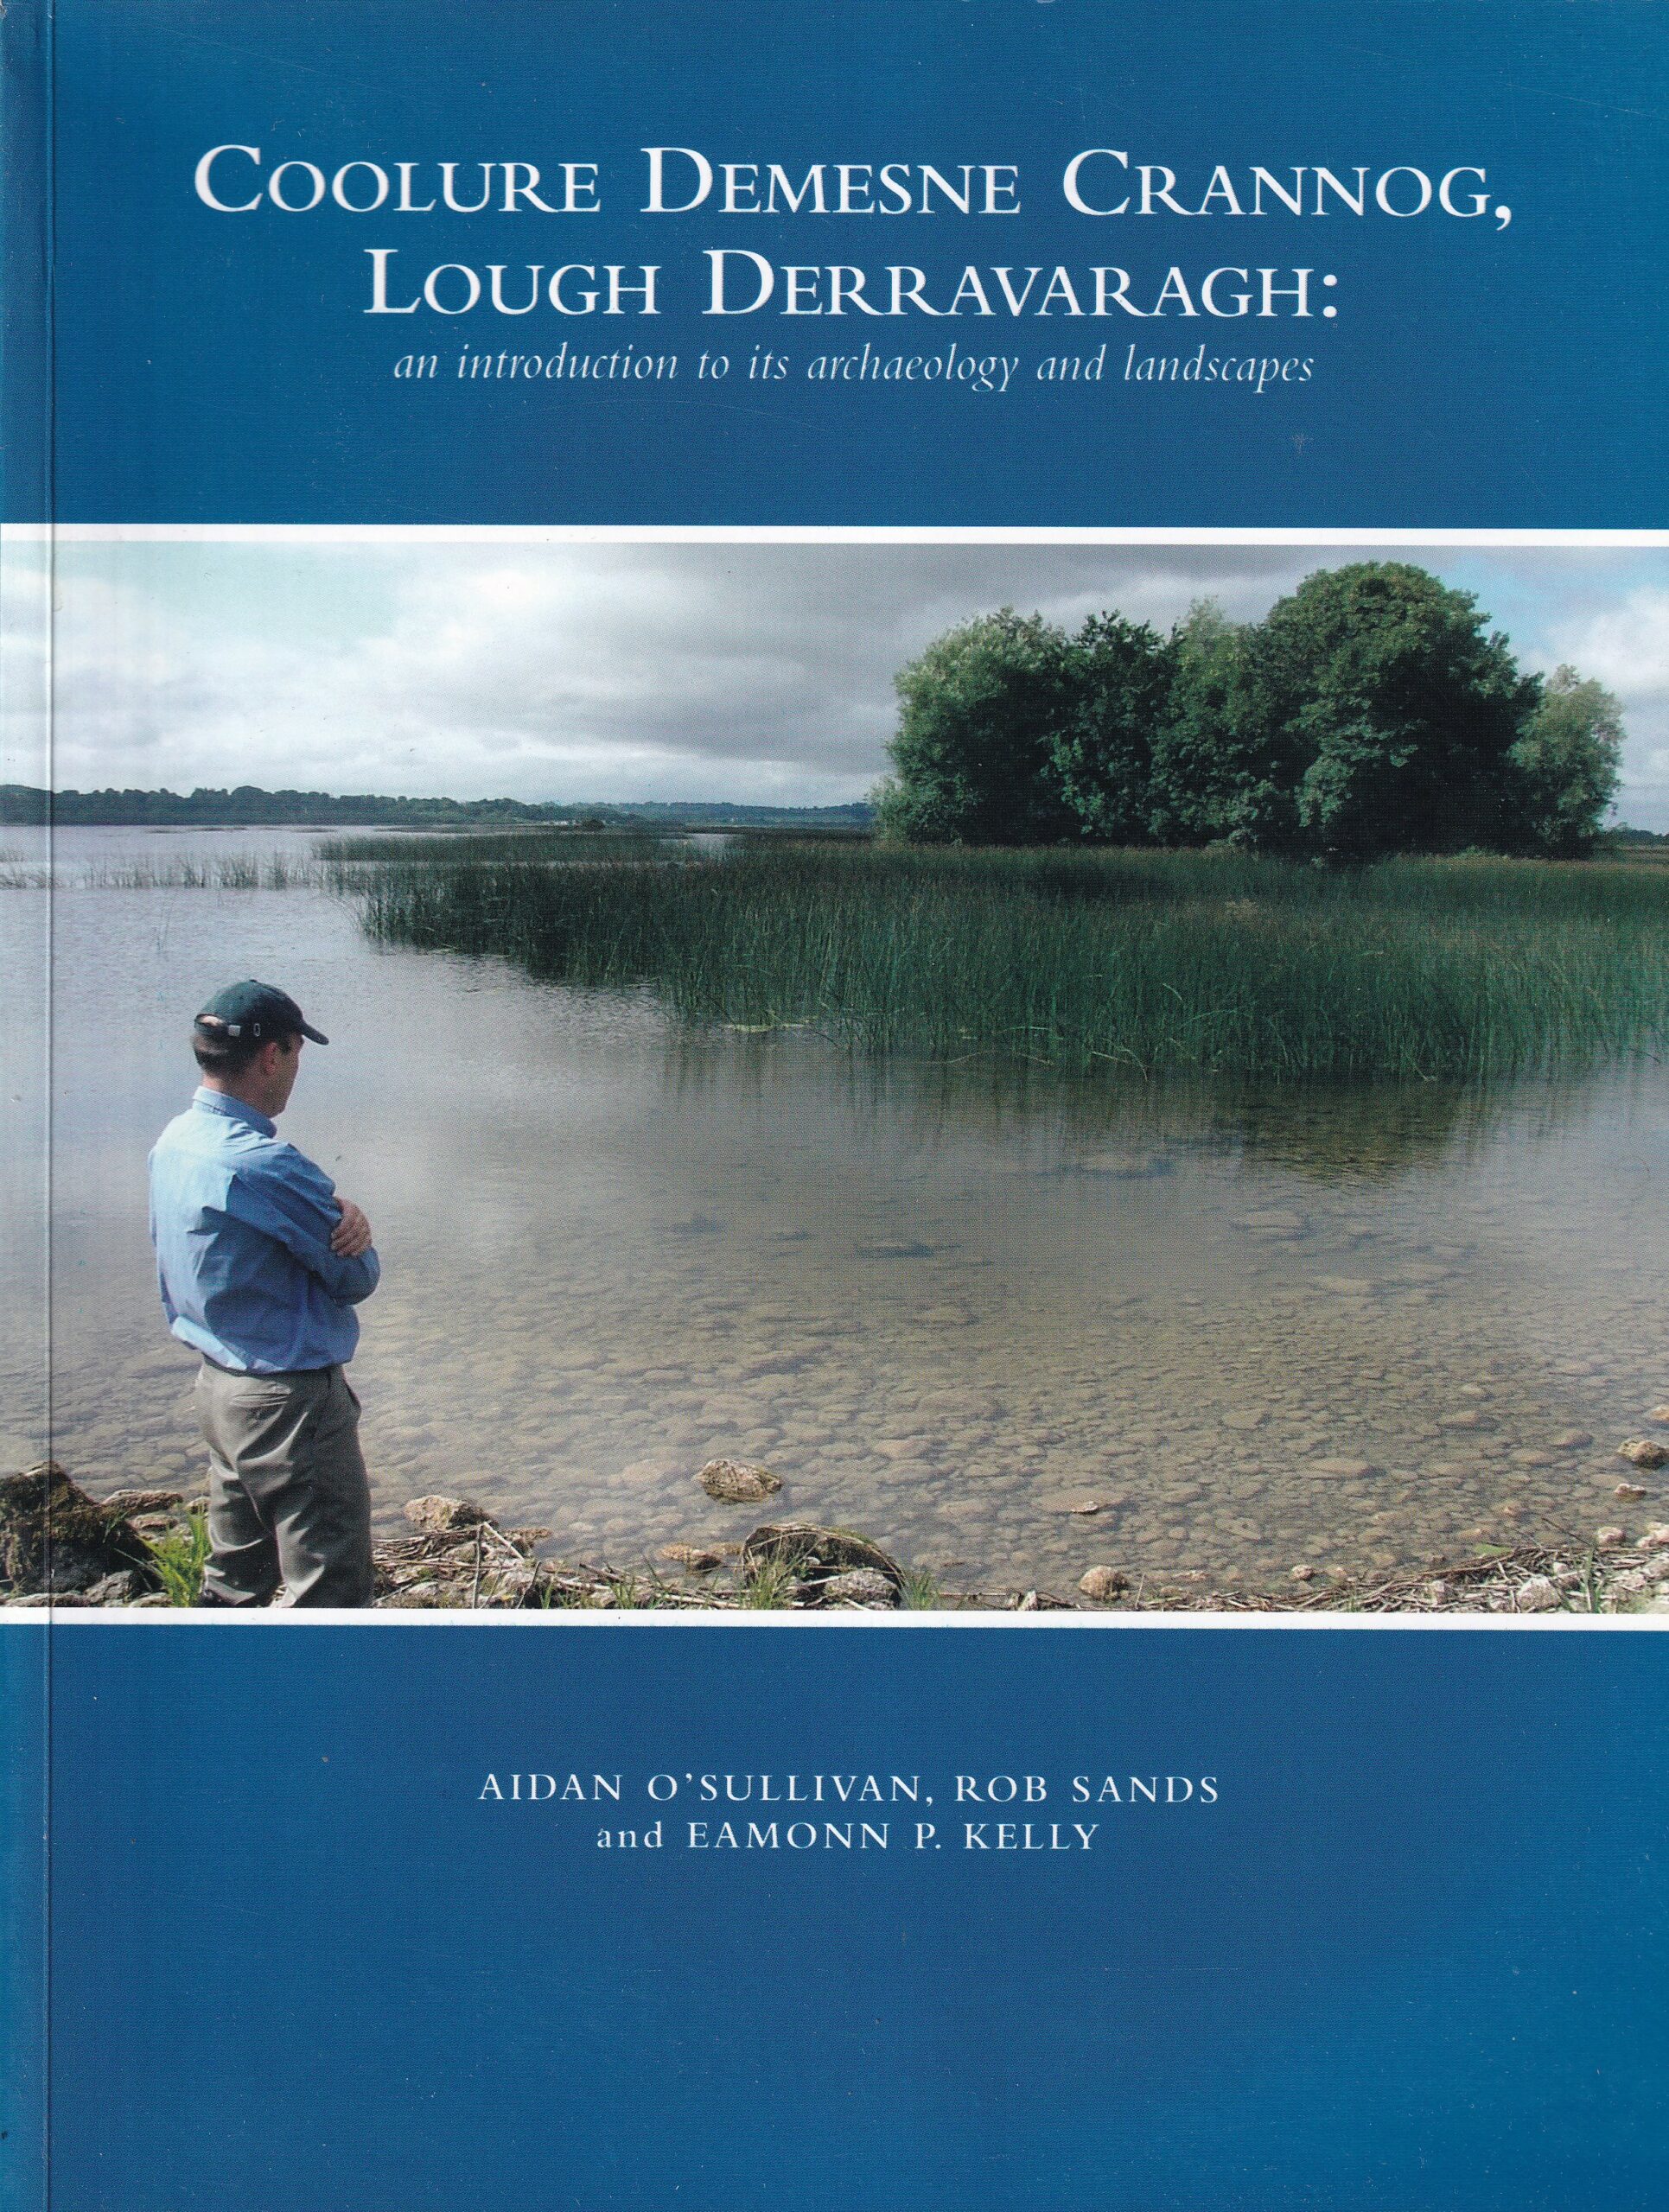 Coolure Demesne Crannog, Lough Derravaragh: An Introduction to its Archaeology and Landscapes | Aidan O'Sullivan, Rob Sands and Eamonn P. Kelly | Charlie Byrne's